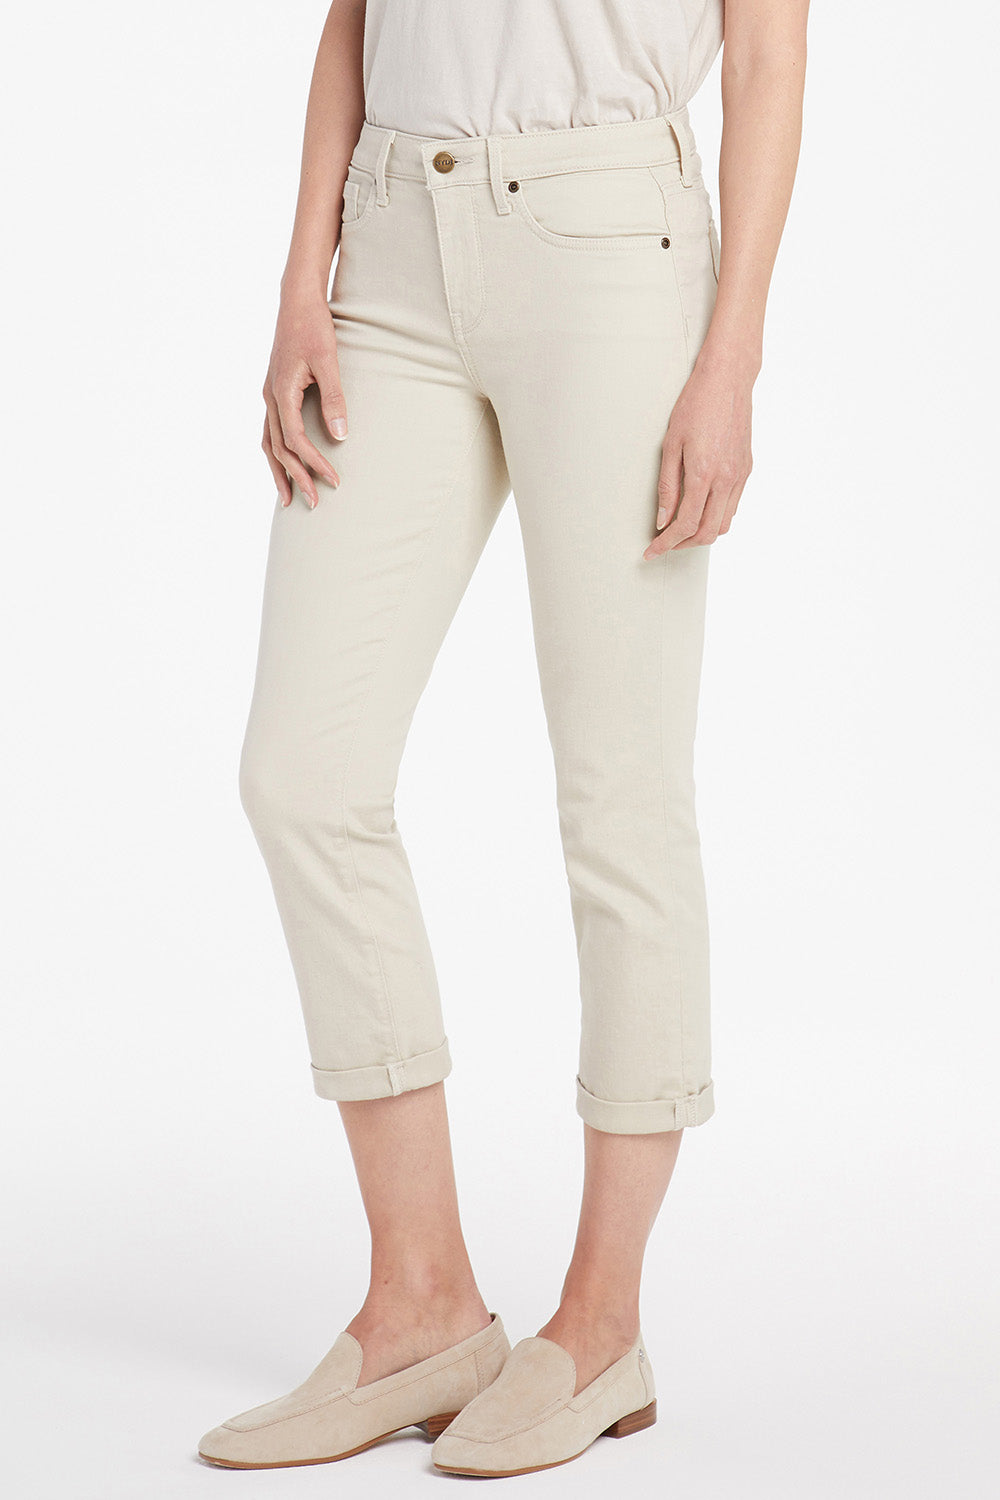 Chloe Skinny Capri Jeans With Roll Cuffs - Feather Tan